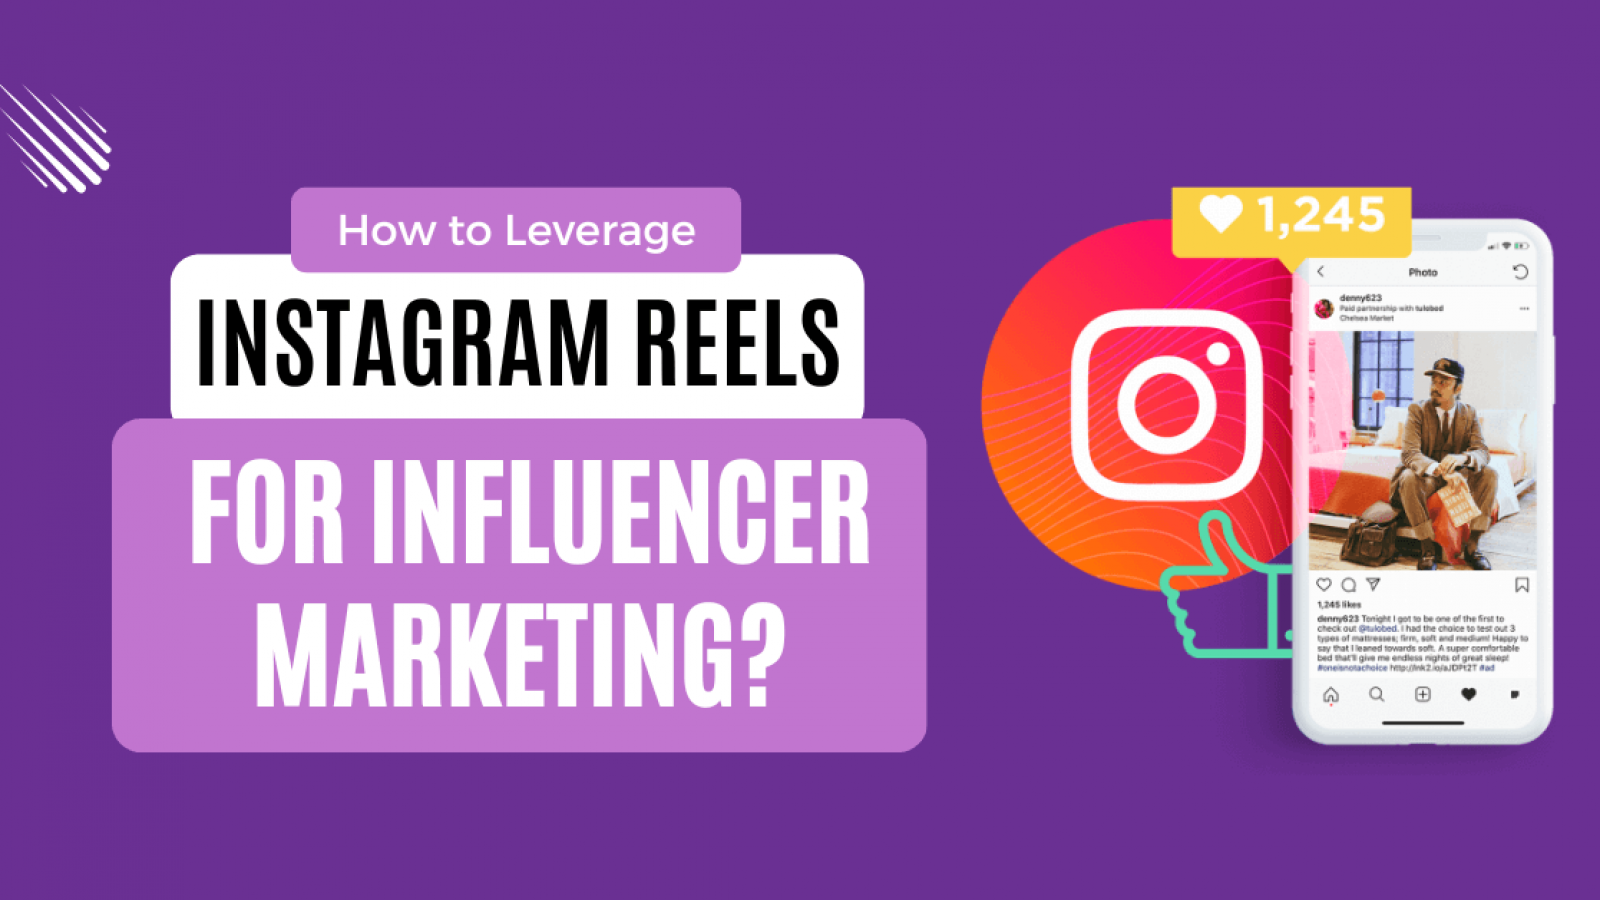 How to Leverage Instagram Reels for Influencer Marketing